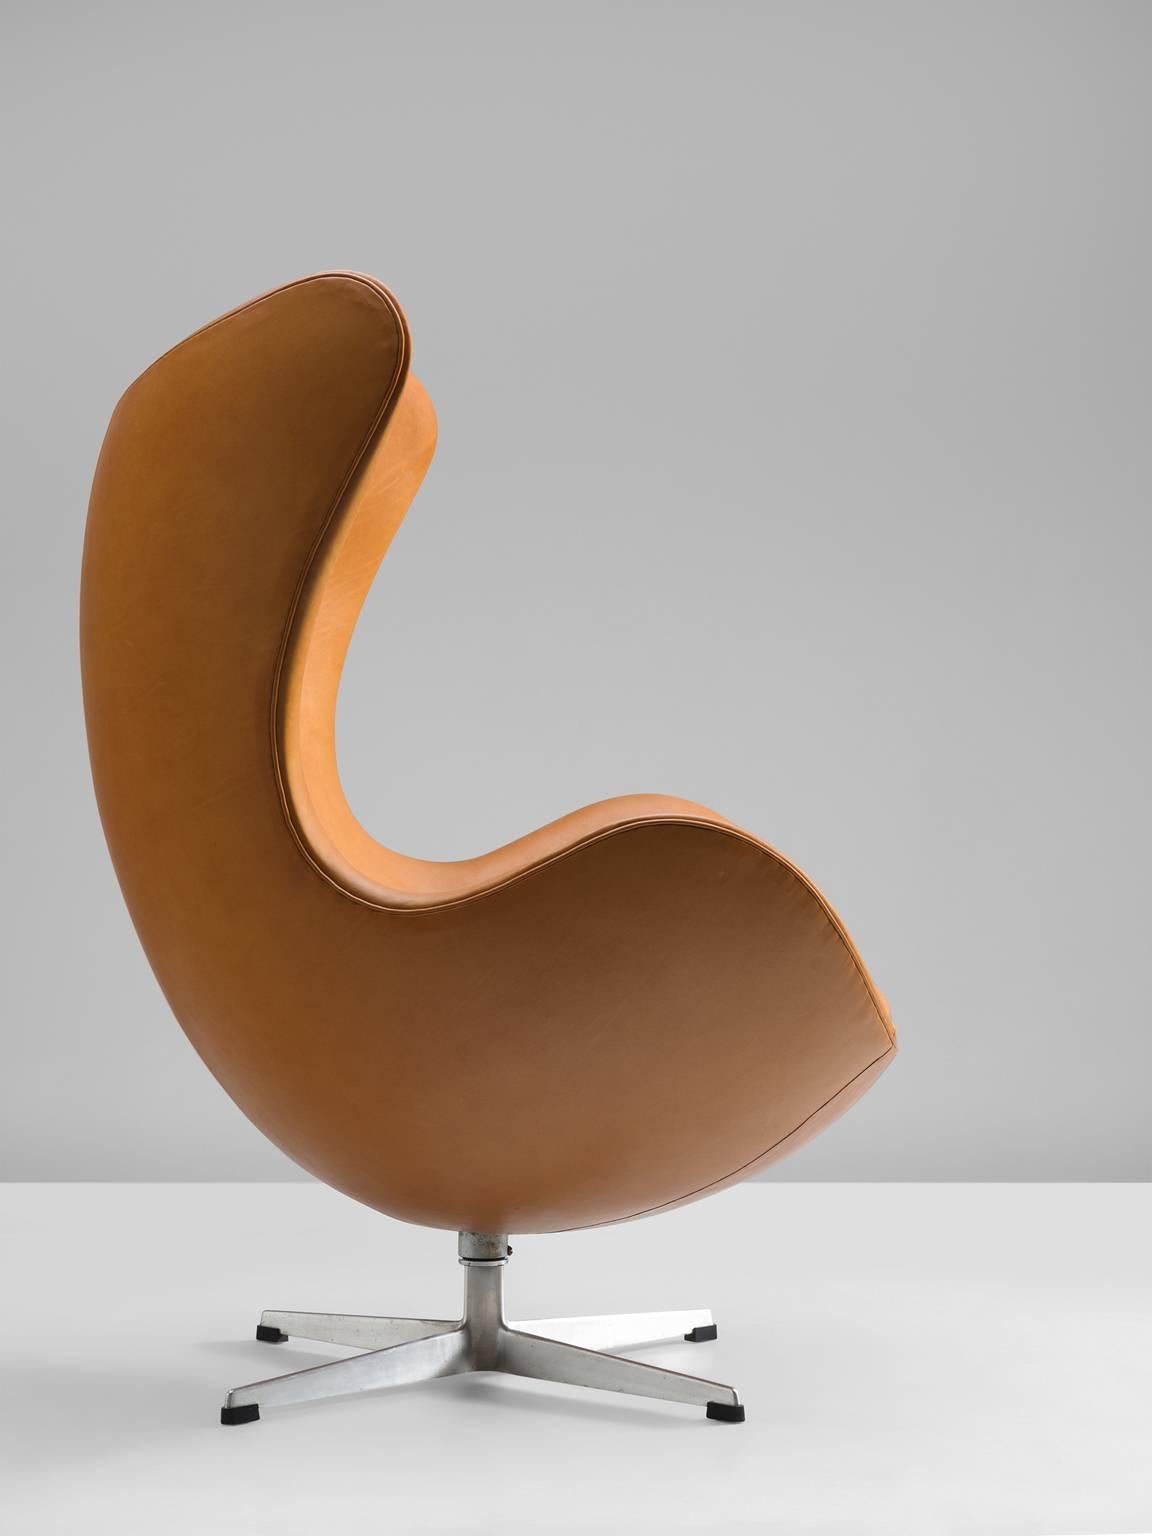 Easy chair 3316 by Arne Jacobsen, aniline leather, steel, Denmark, designed 1958, produced late 1960s, upholstered in our in-house studio in 2017.

This chair is one of the most iconic design in the history of Danish design. The chair has been